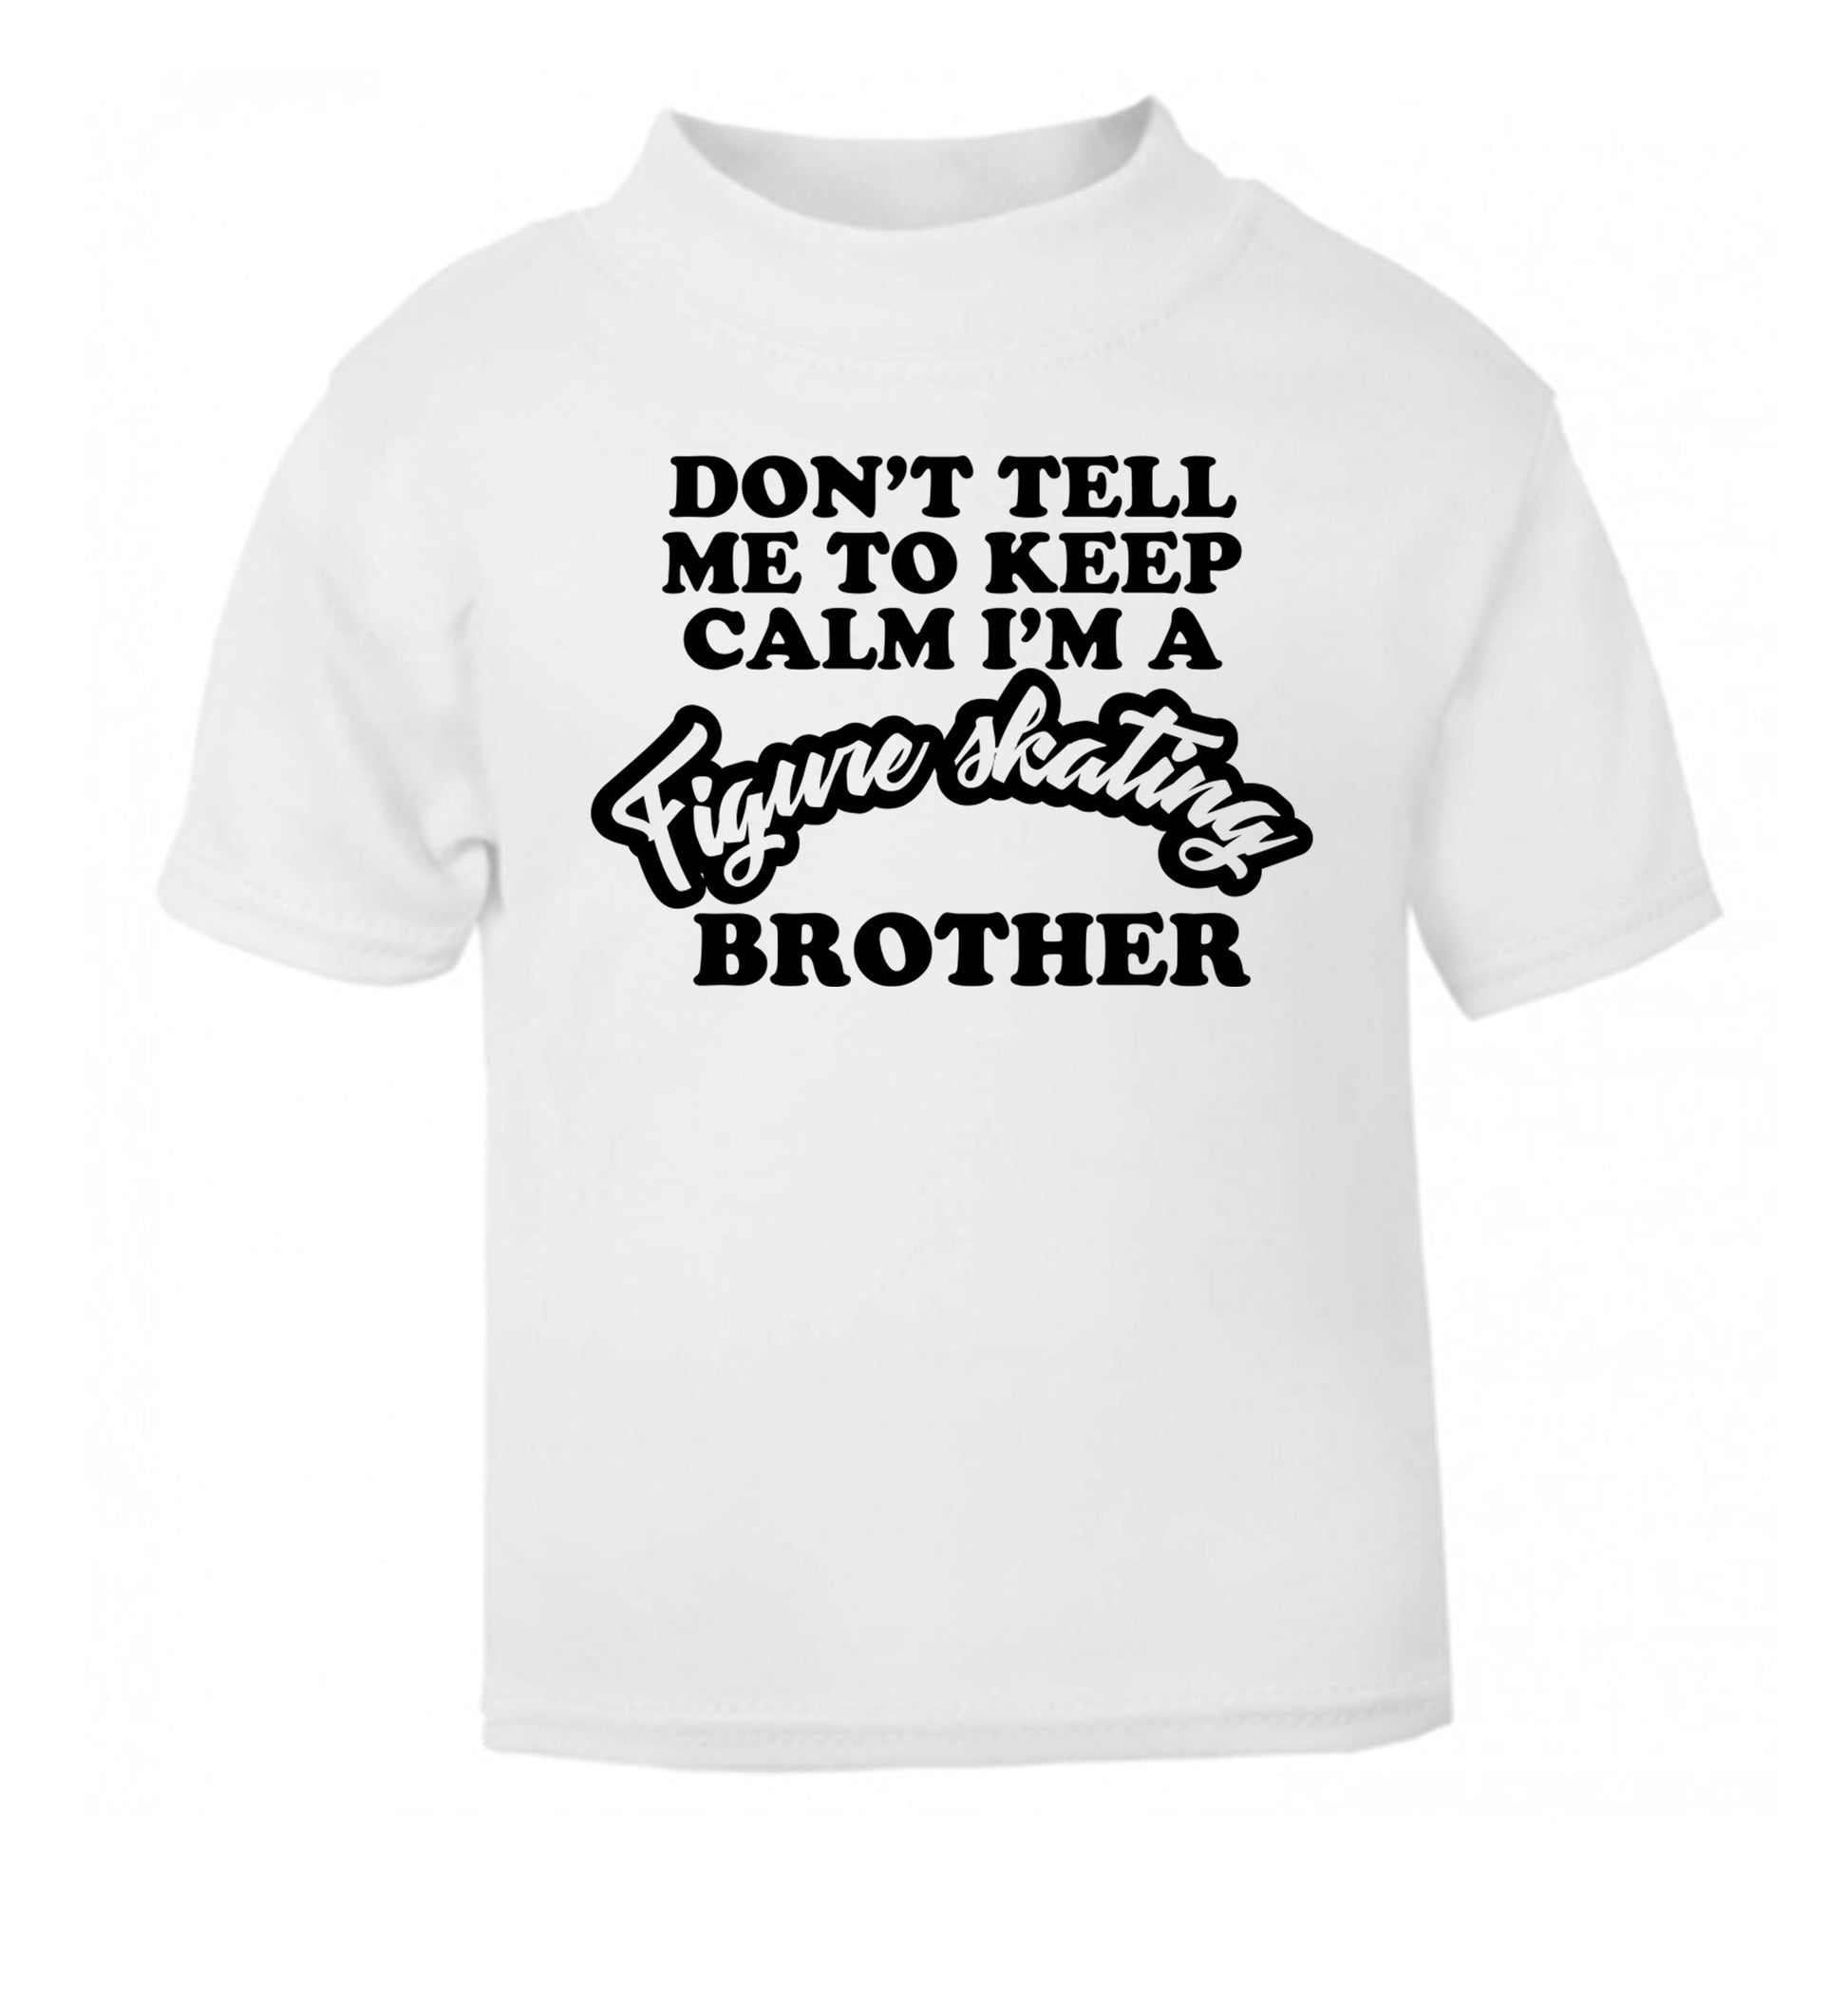 Don't tell me to keep calm I'm a figure skating brother white Baby Toddler Tshirt 2 Years